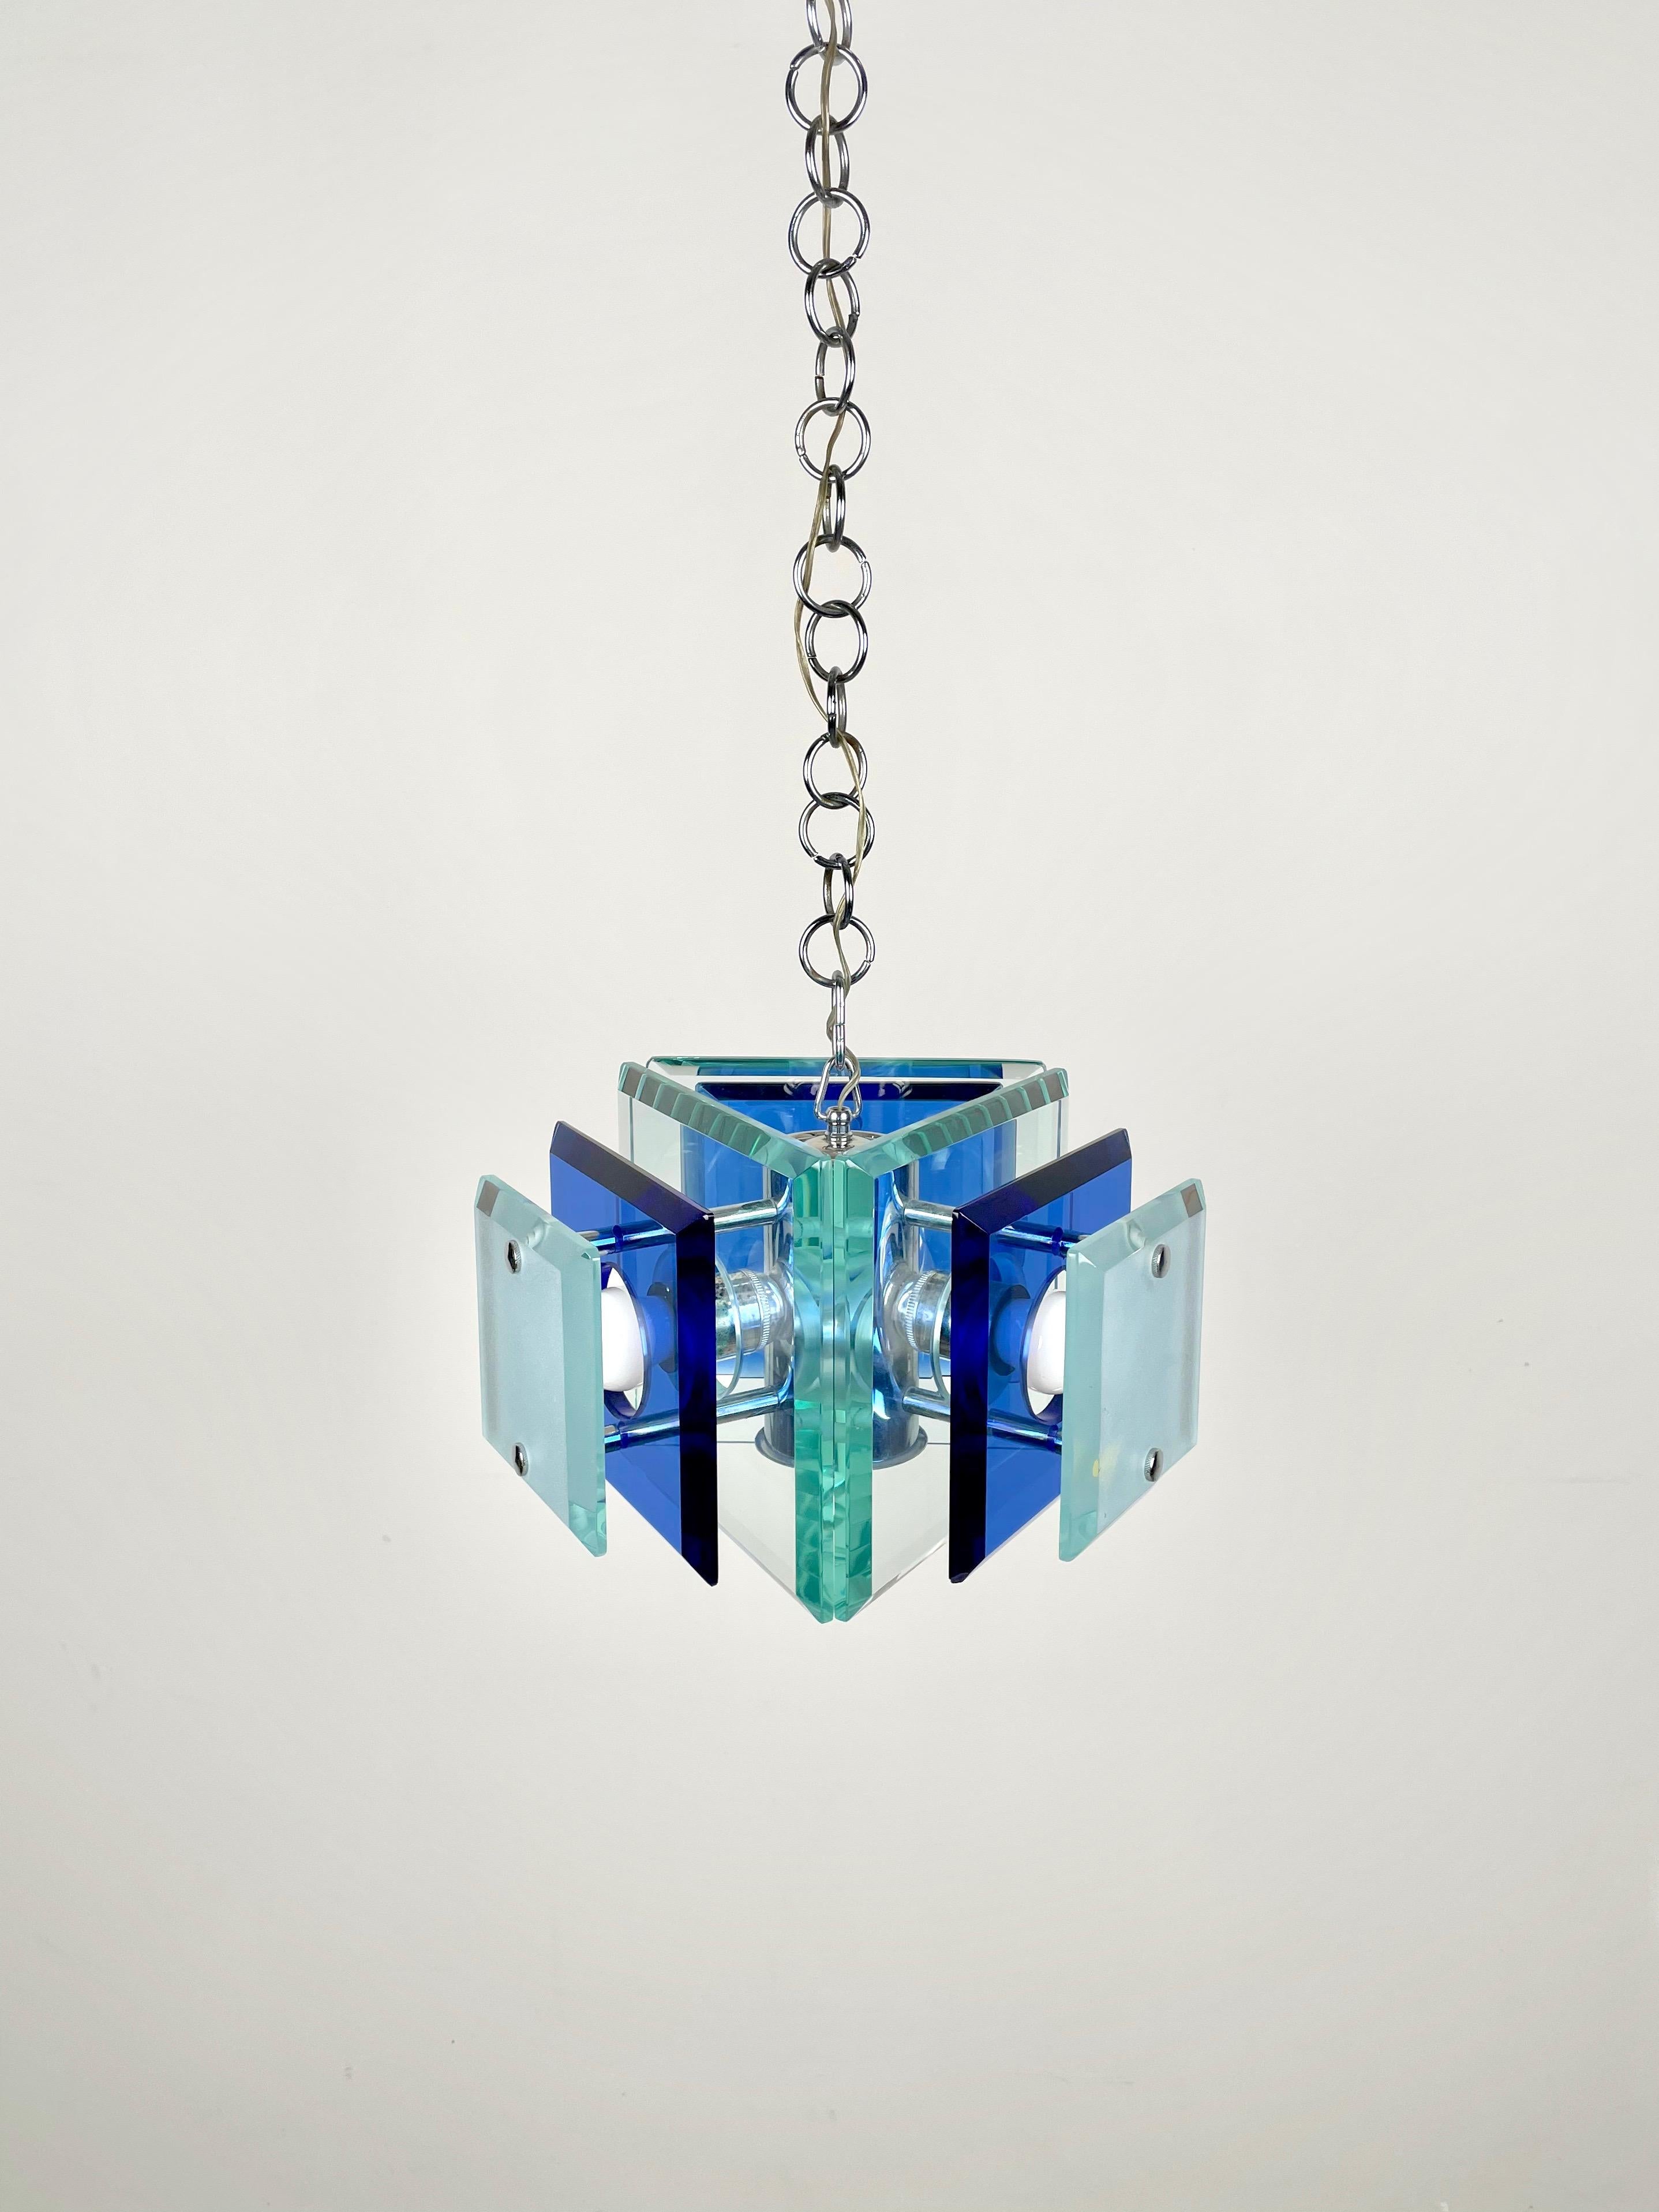 Lupi Cristal Luxor Blue Glass and Chrome Chandelier, Italy, 1970s In Good Condition For Sale In Rome, IT